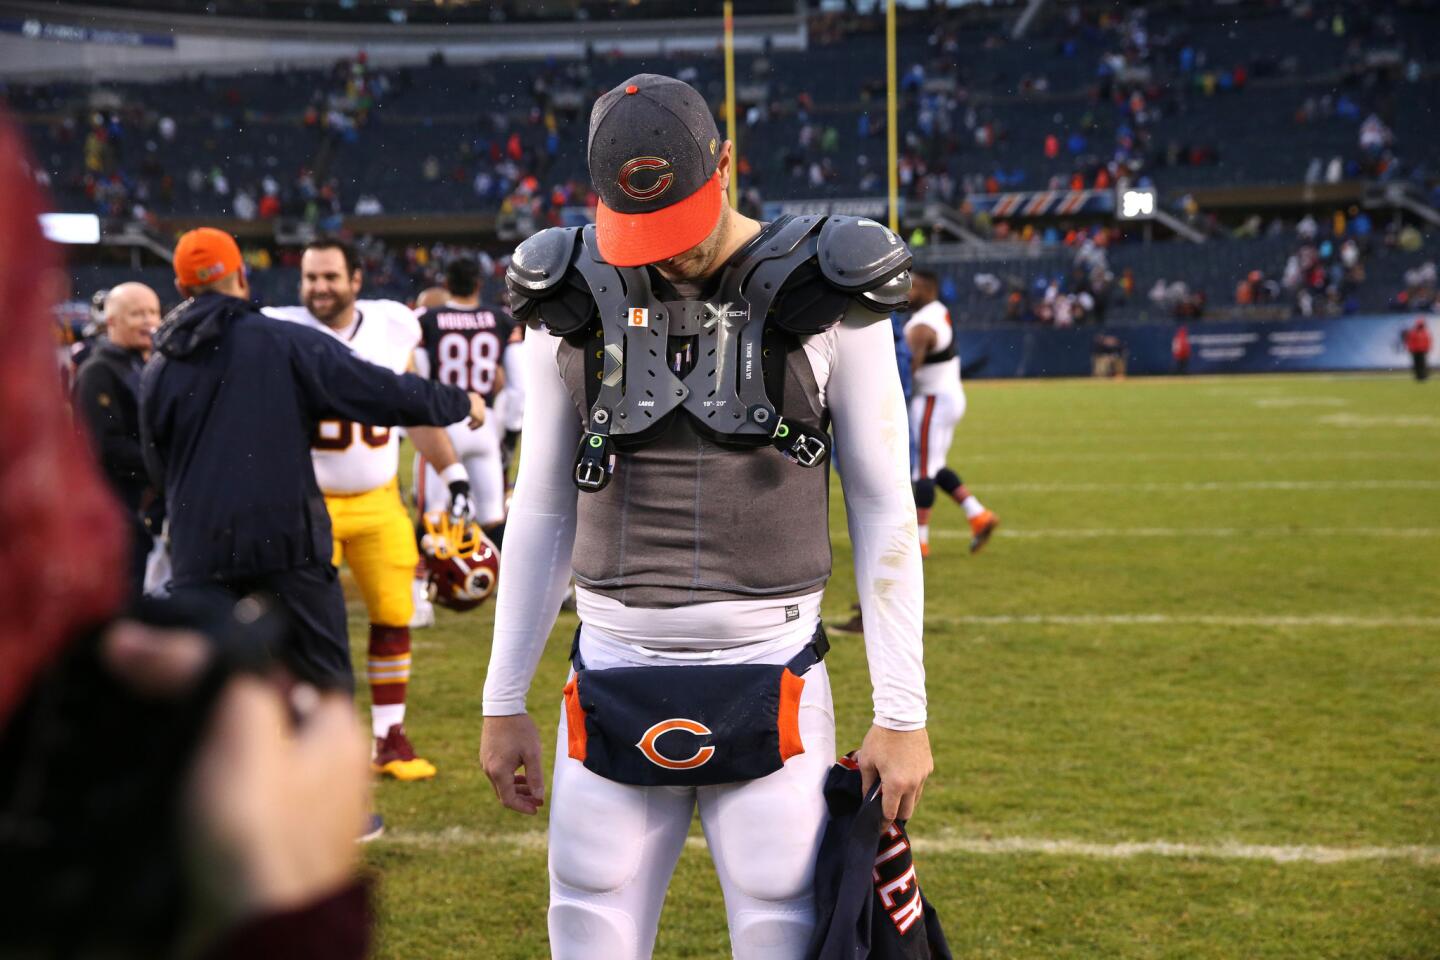 Bears quarterback Jay Cutler heads to the locker room after the 24-21 loss to the Redskins.